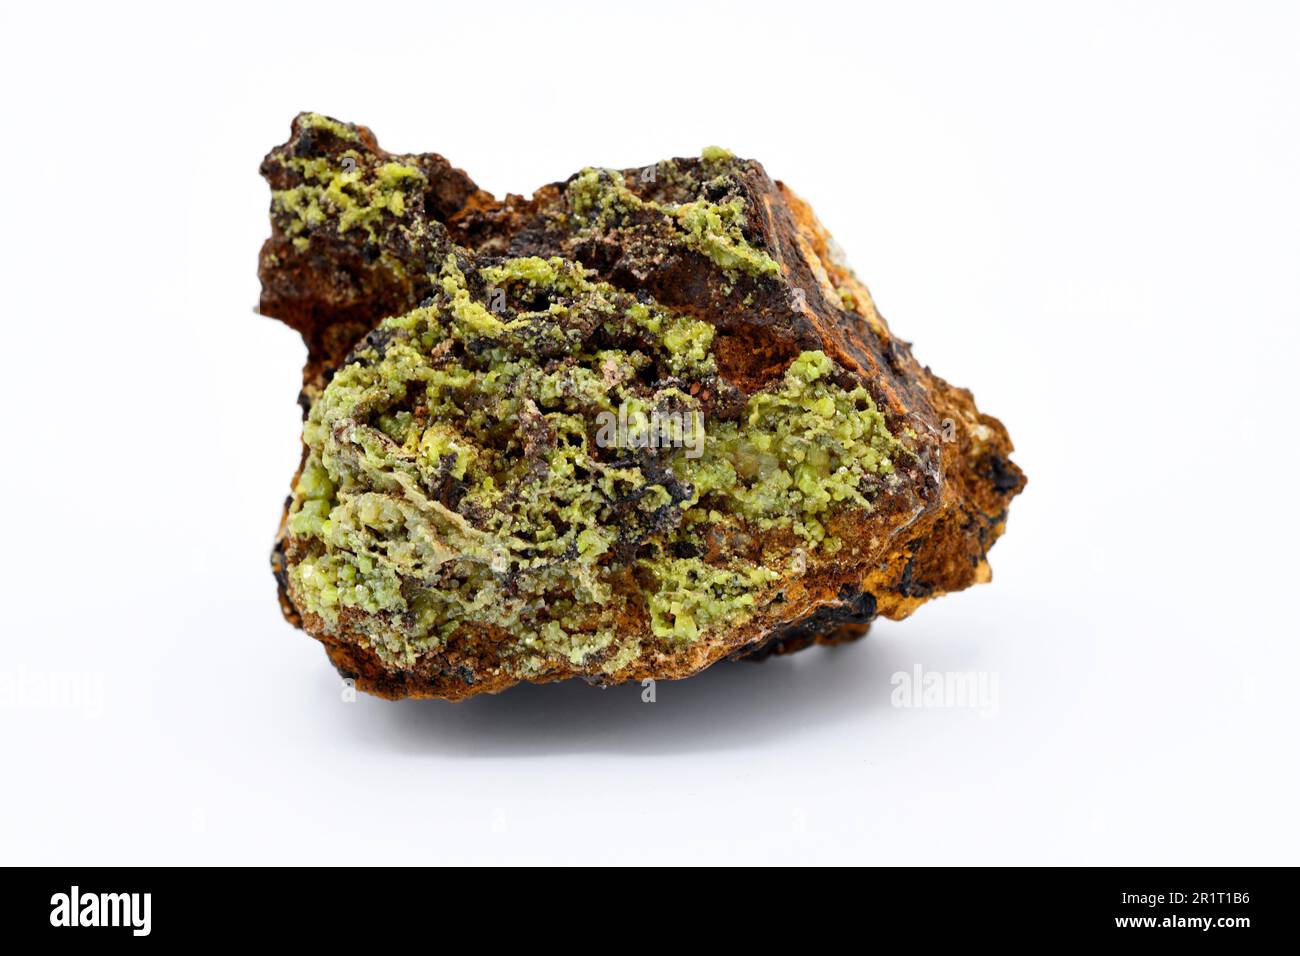 Pyromorphite is a lead phosphate mineral. This sample comes from Moulay Bouazza, Morocco. Stock Photo